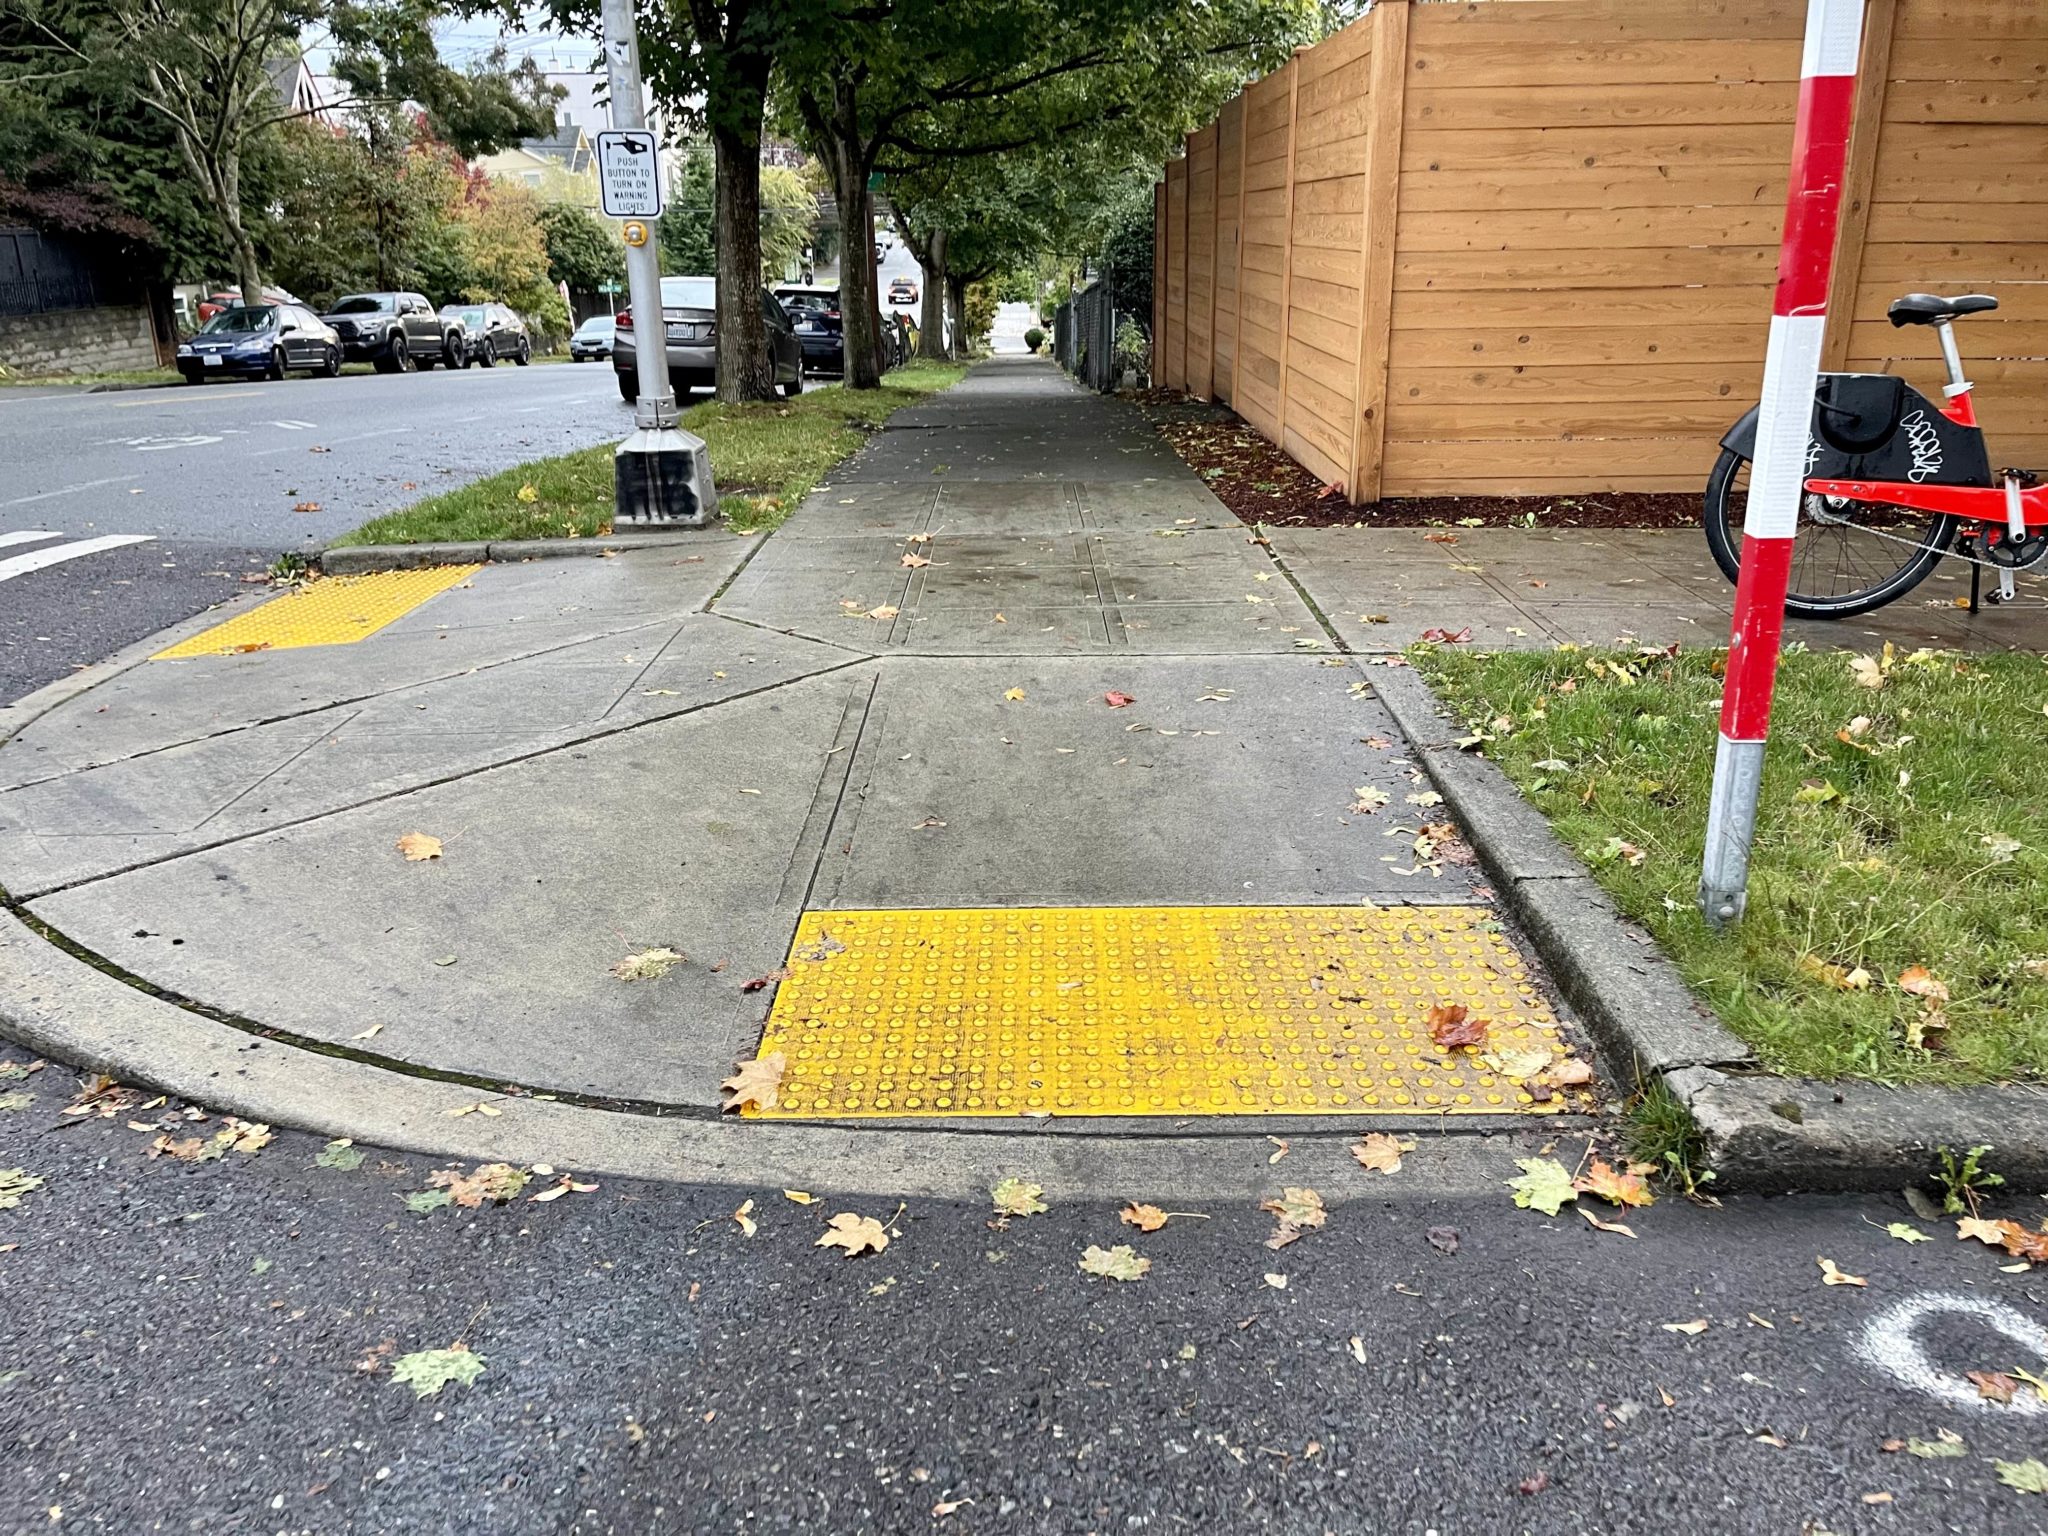 Photo of a sidewalk curb ramp in Seattle. The curb ramp is in the middle of the photo, with the street visible in the foreground and sidewalk visible above it.